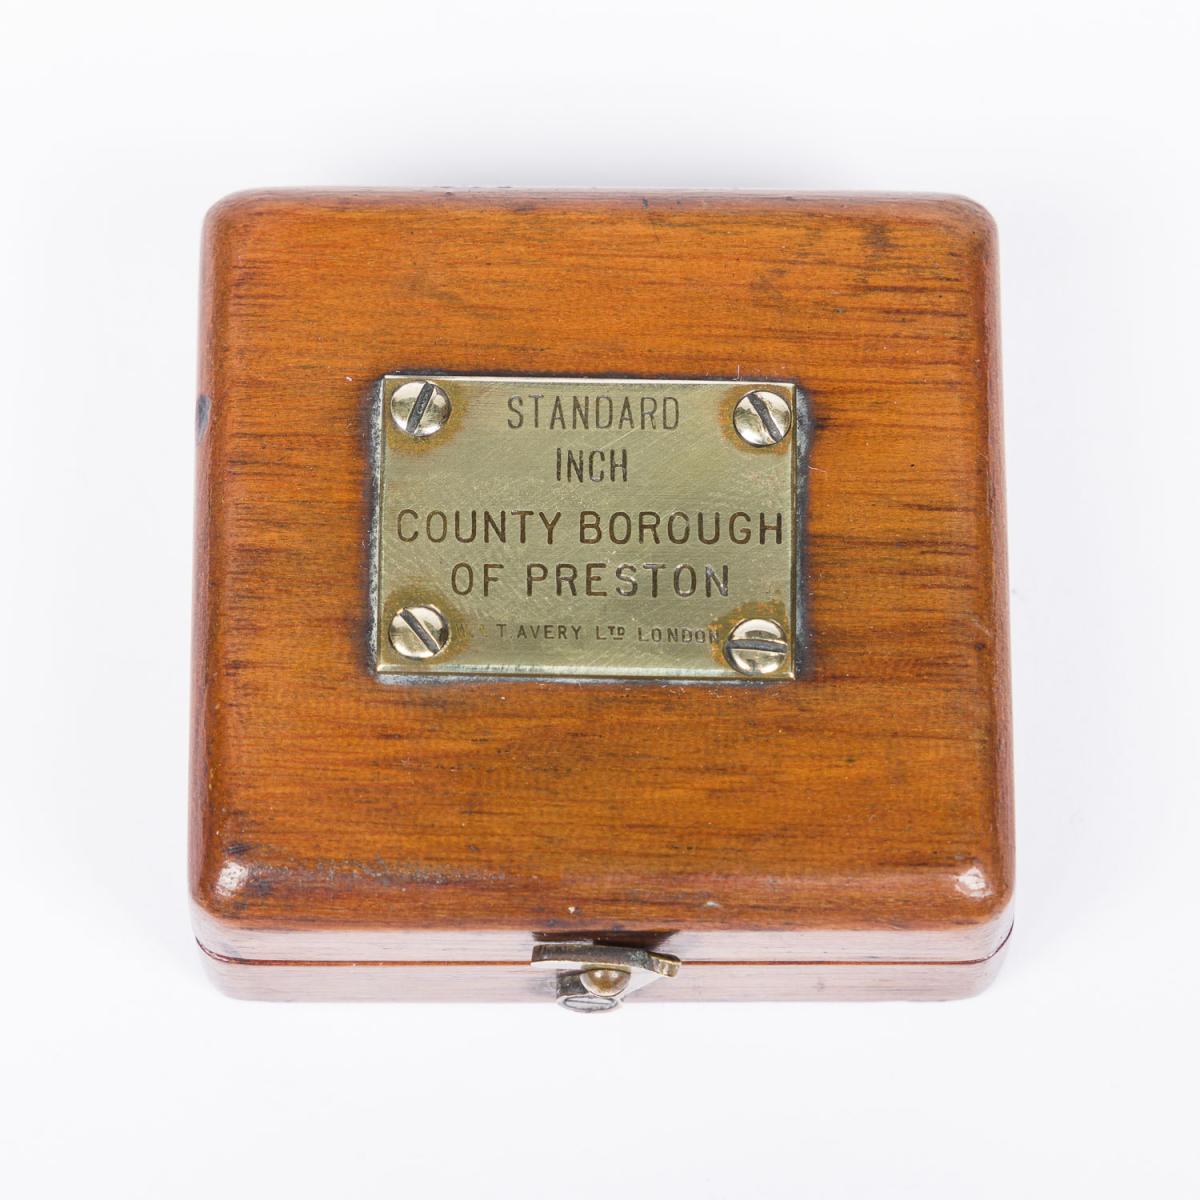 Standard inch by W & T Avery for the County Borough of Preston